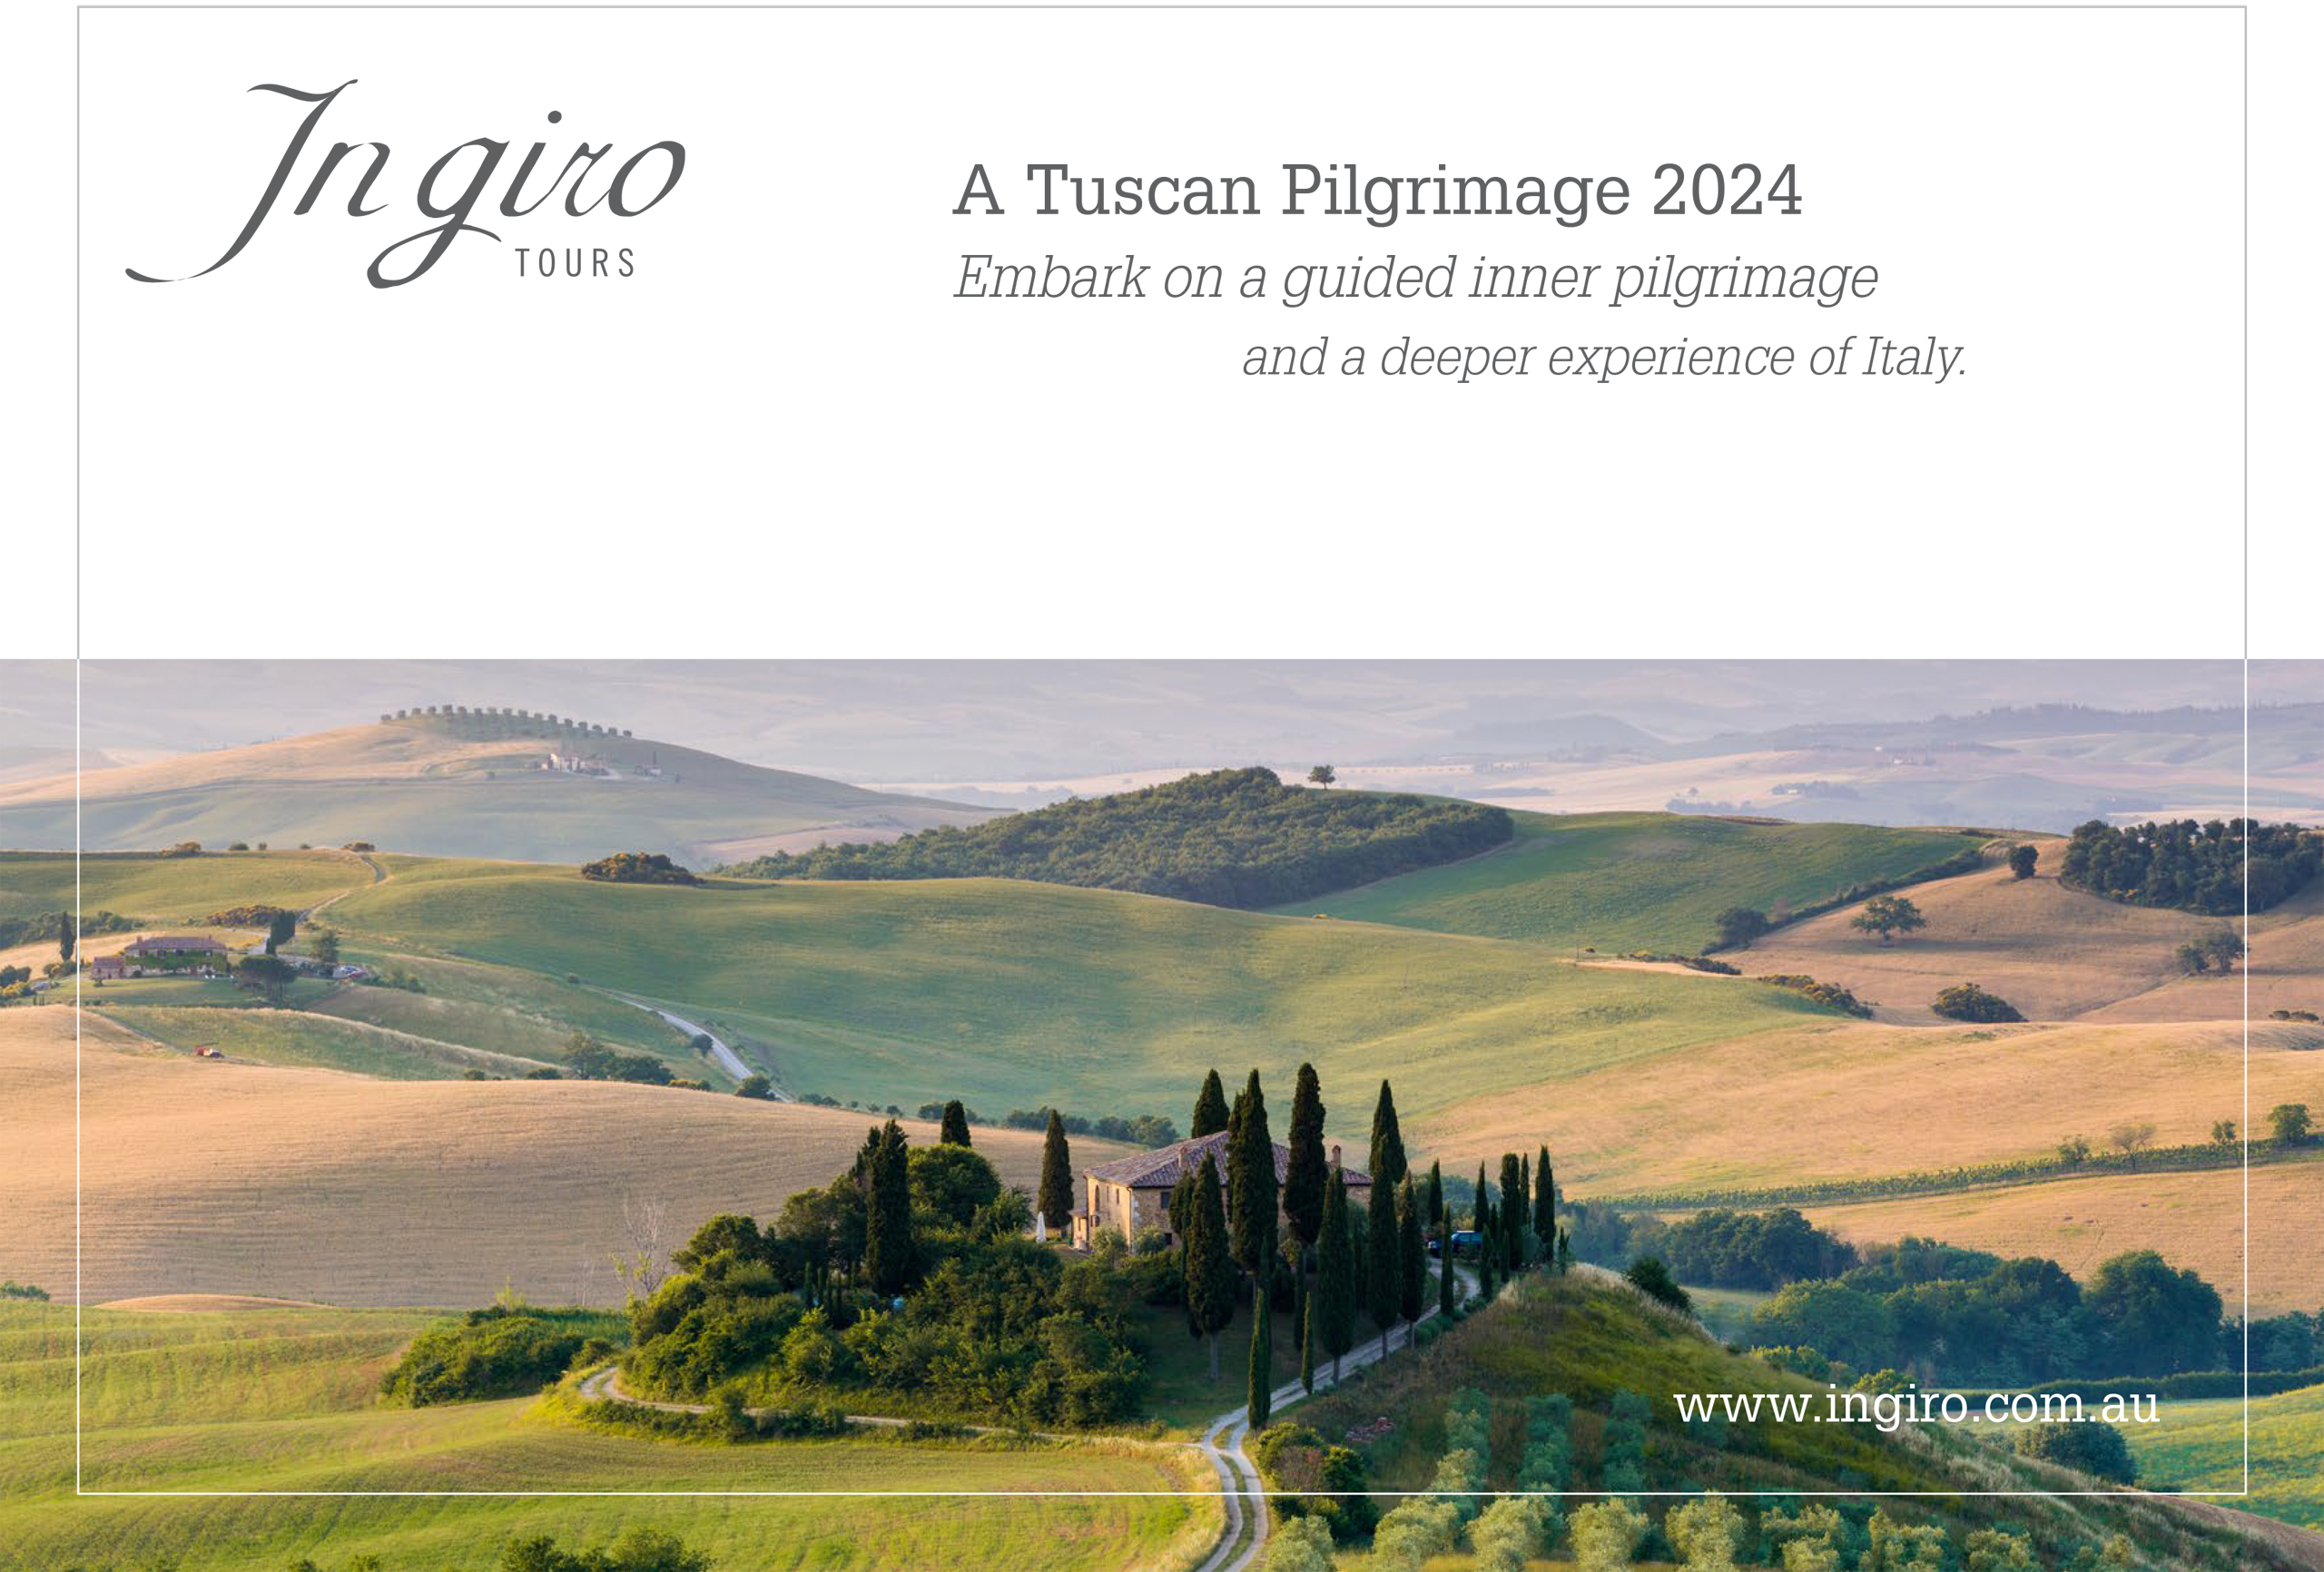 Brochure front page for A Tuscan Pilgrimage 2024, showing an aerial photo of a Tuscan landscape.